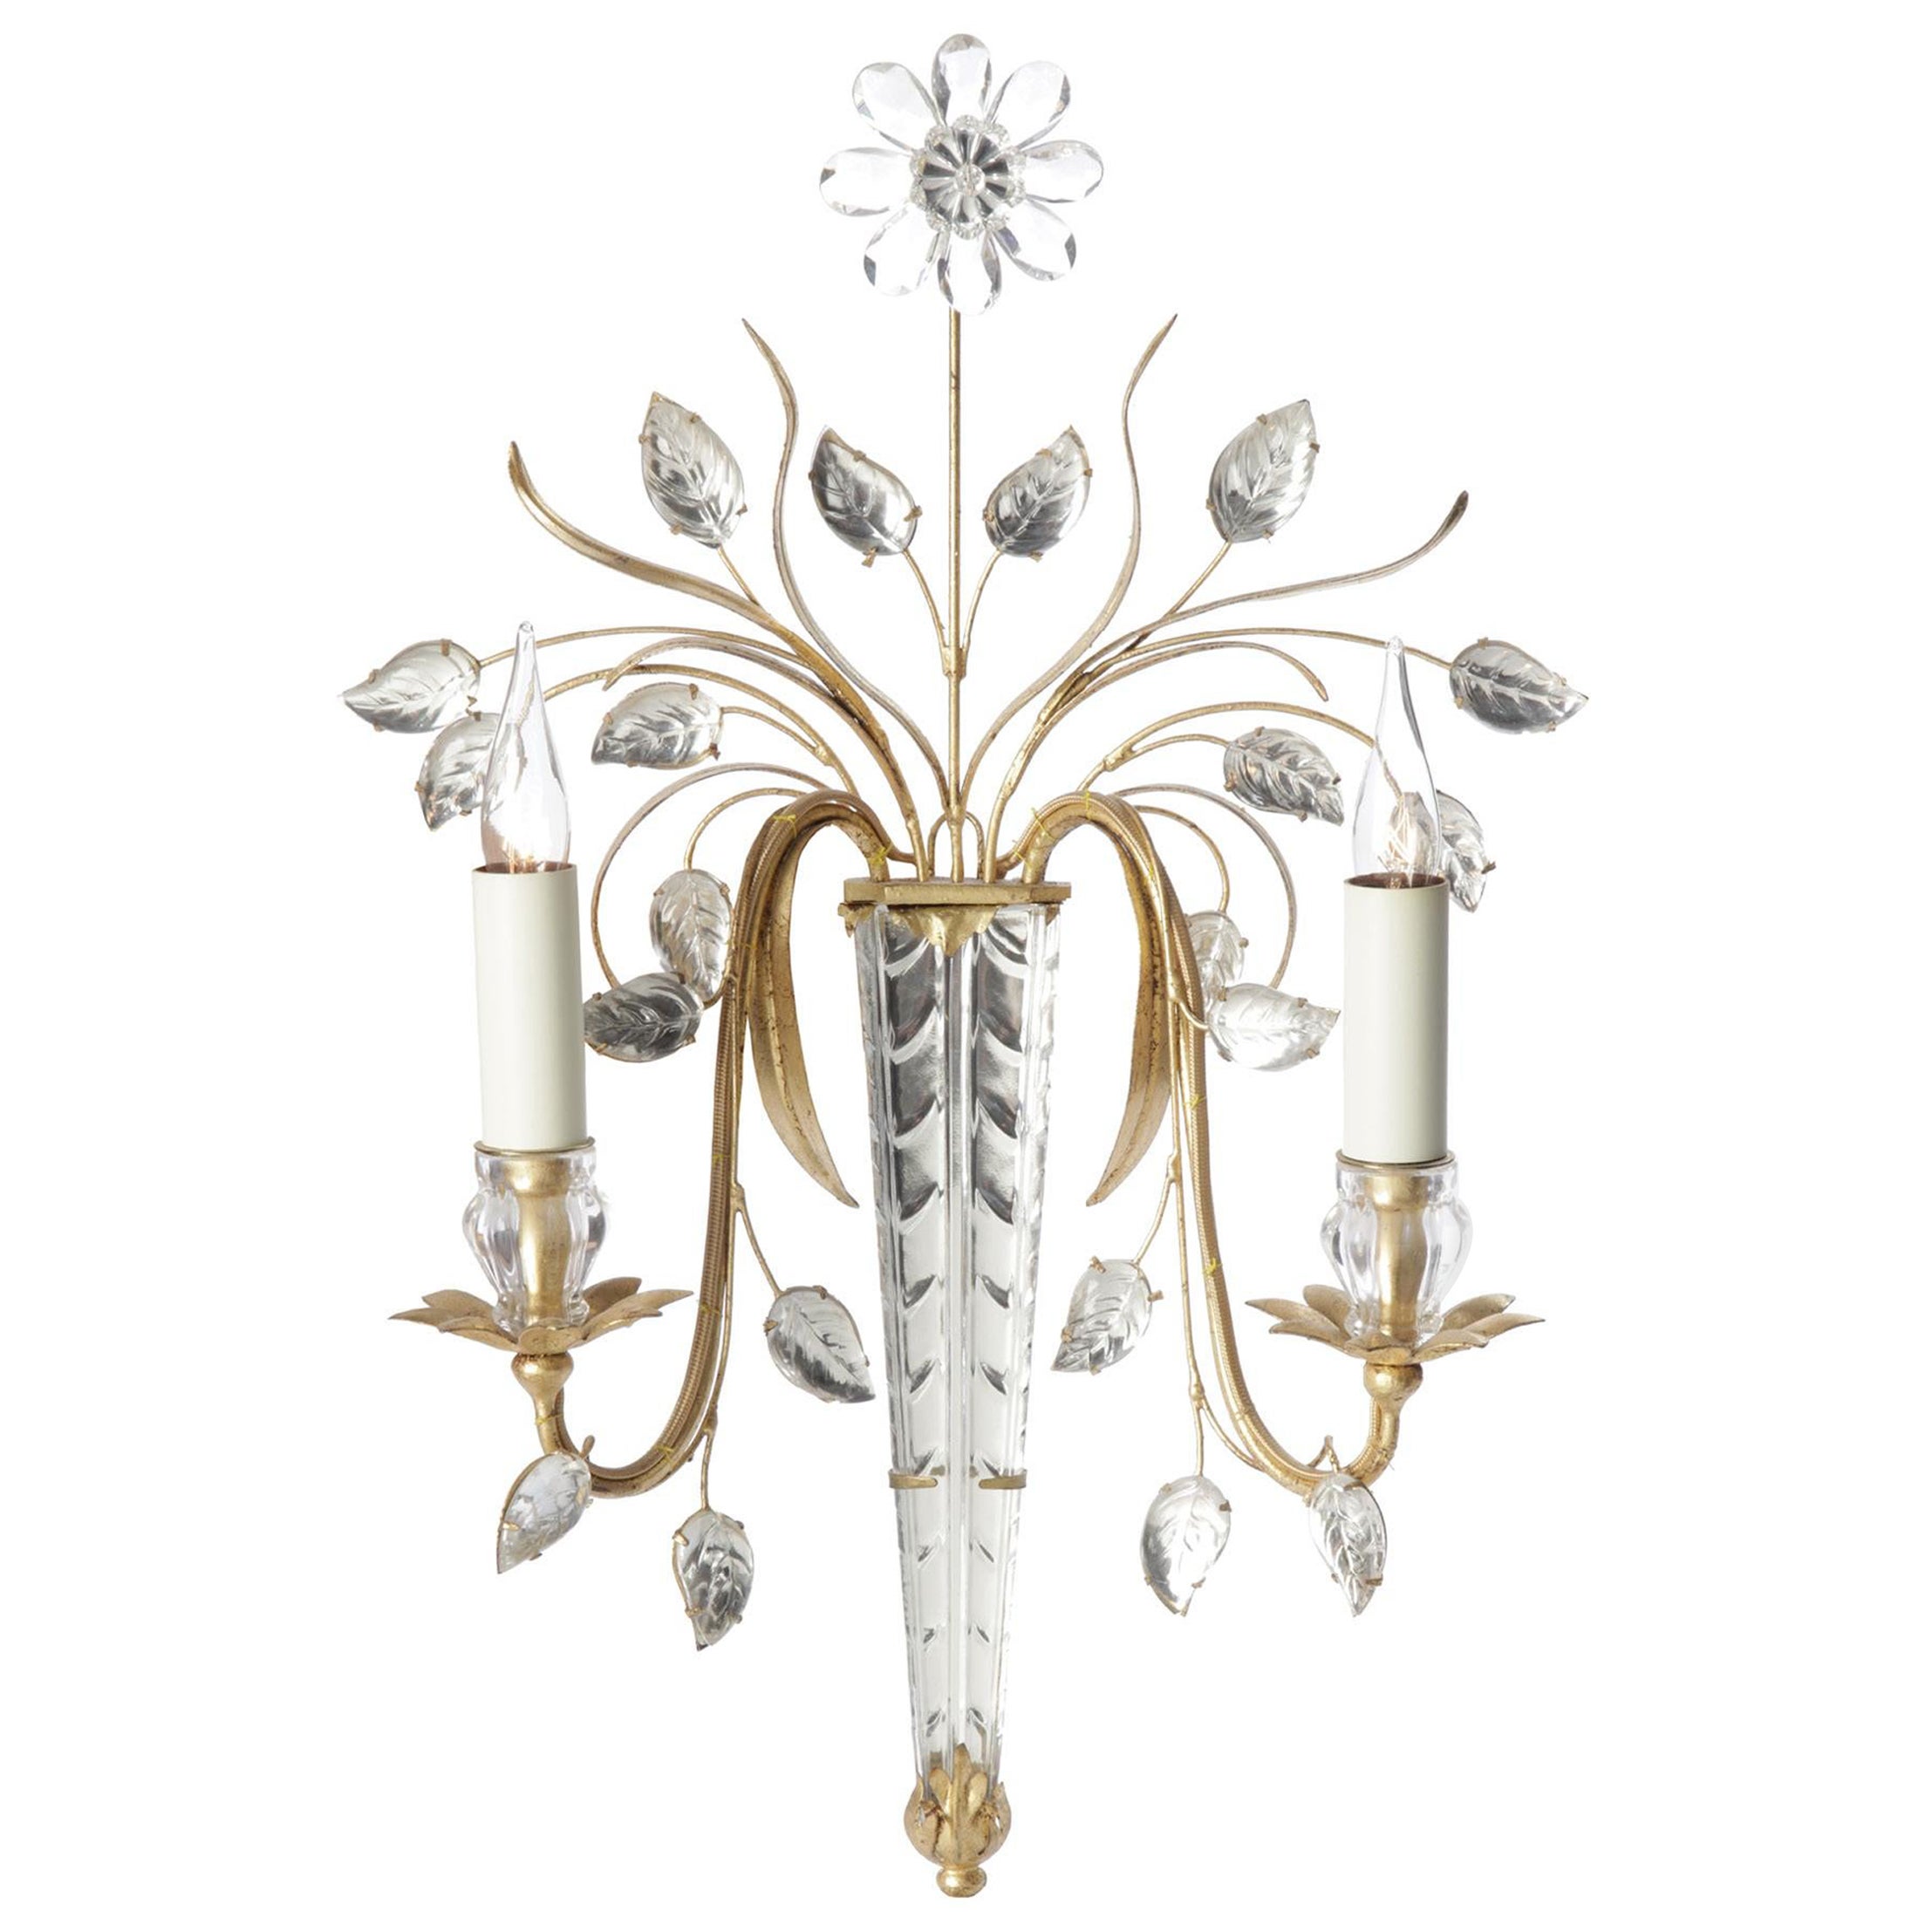 Certified Maison Bagues Sconce, Iron and Crystal 2 Lights #00160